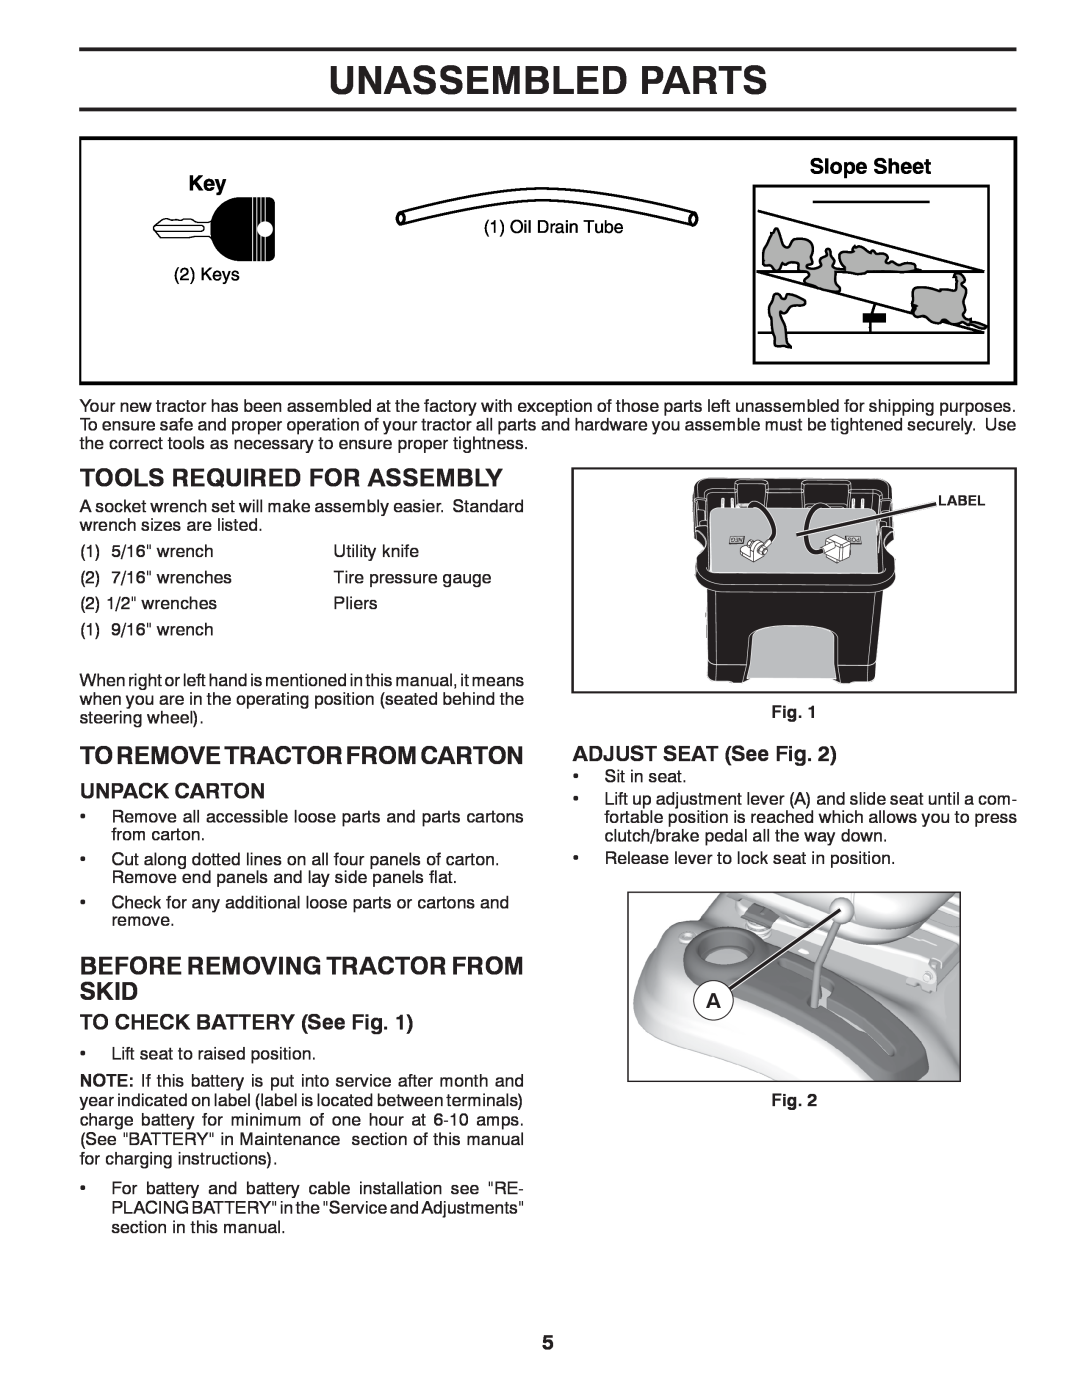 Poulan 96042012400, 438706 Unassembled Parts, Tools Required For Assembly, To Remove Tractor From Carton, Slope Sheet Key 